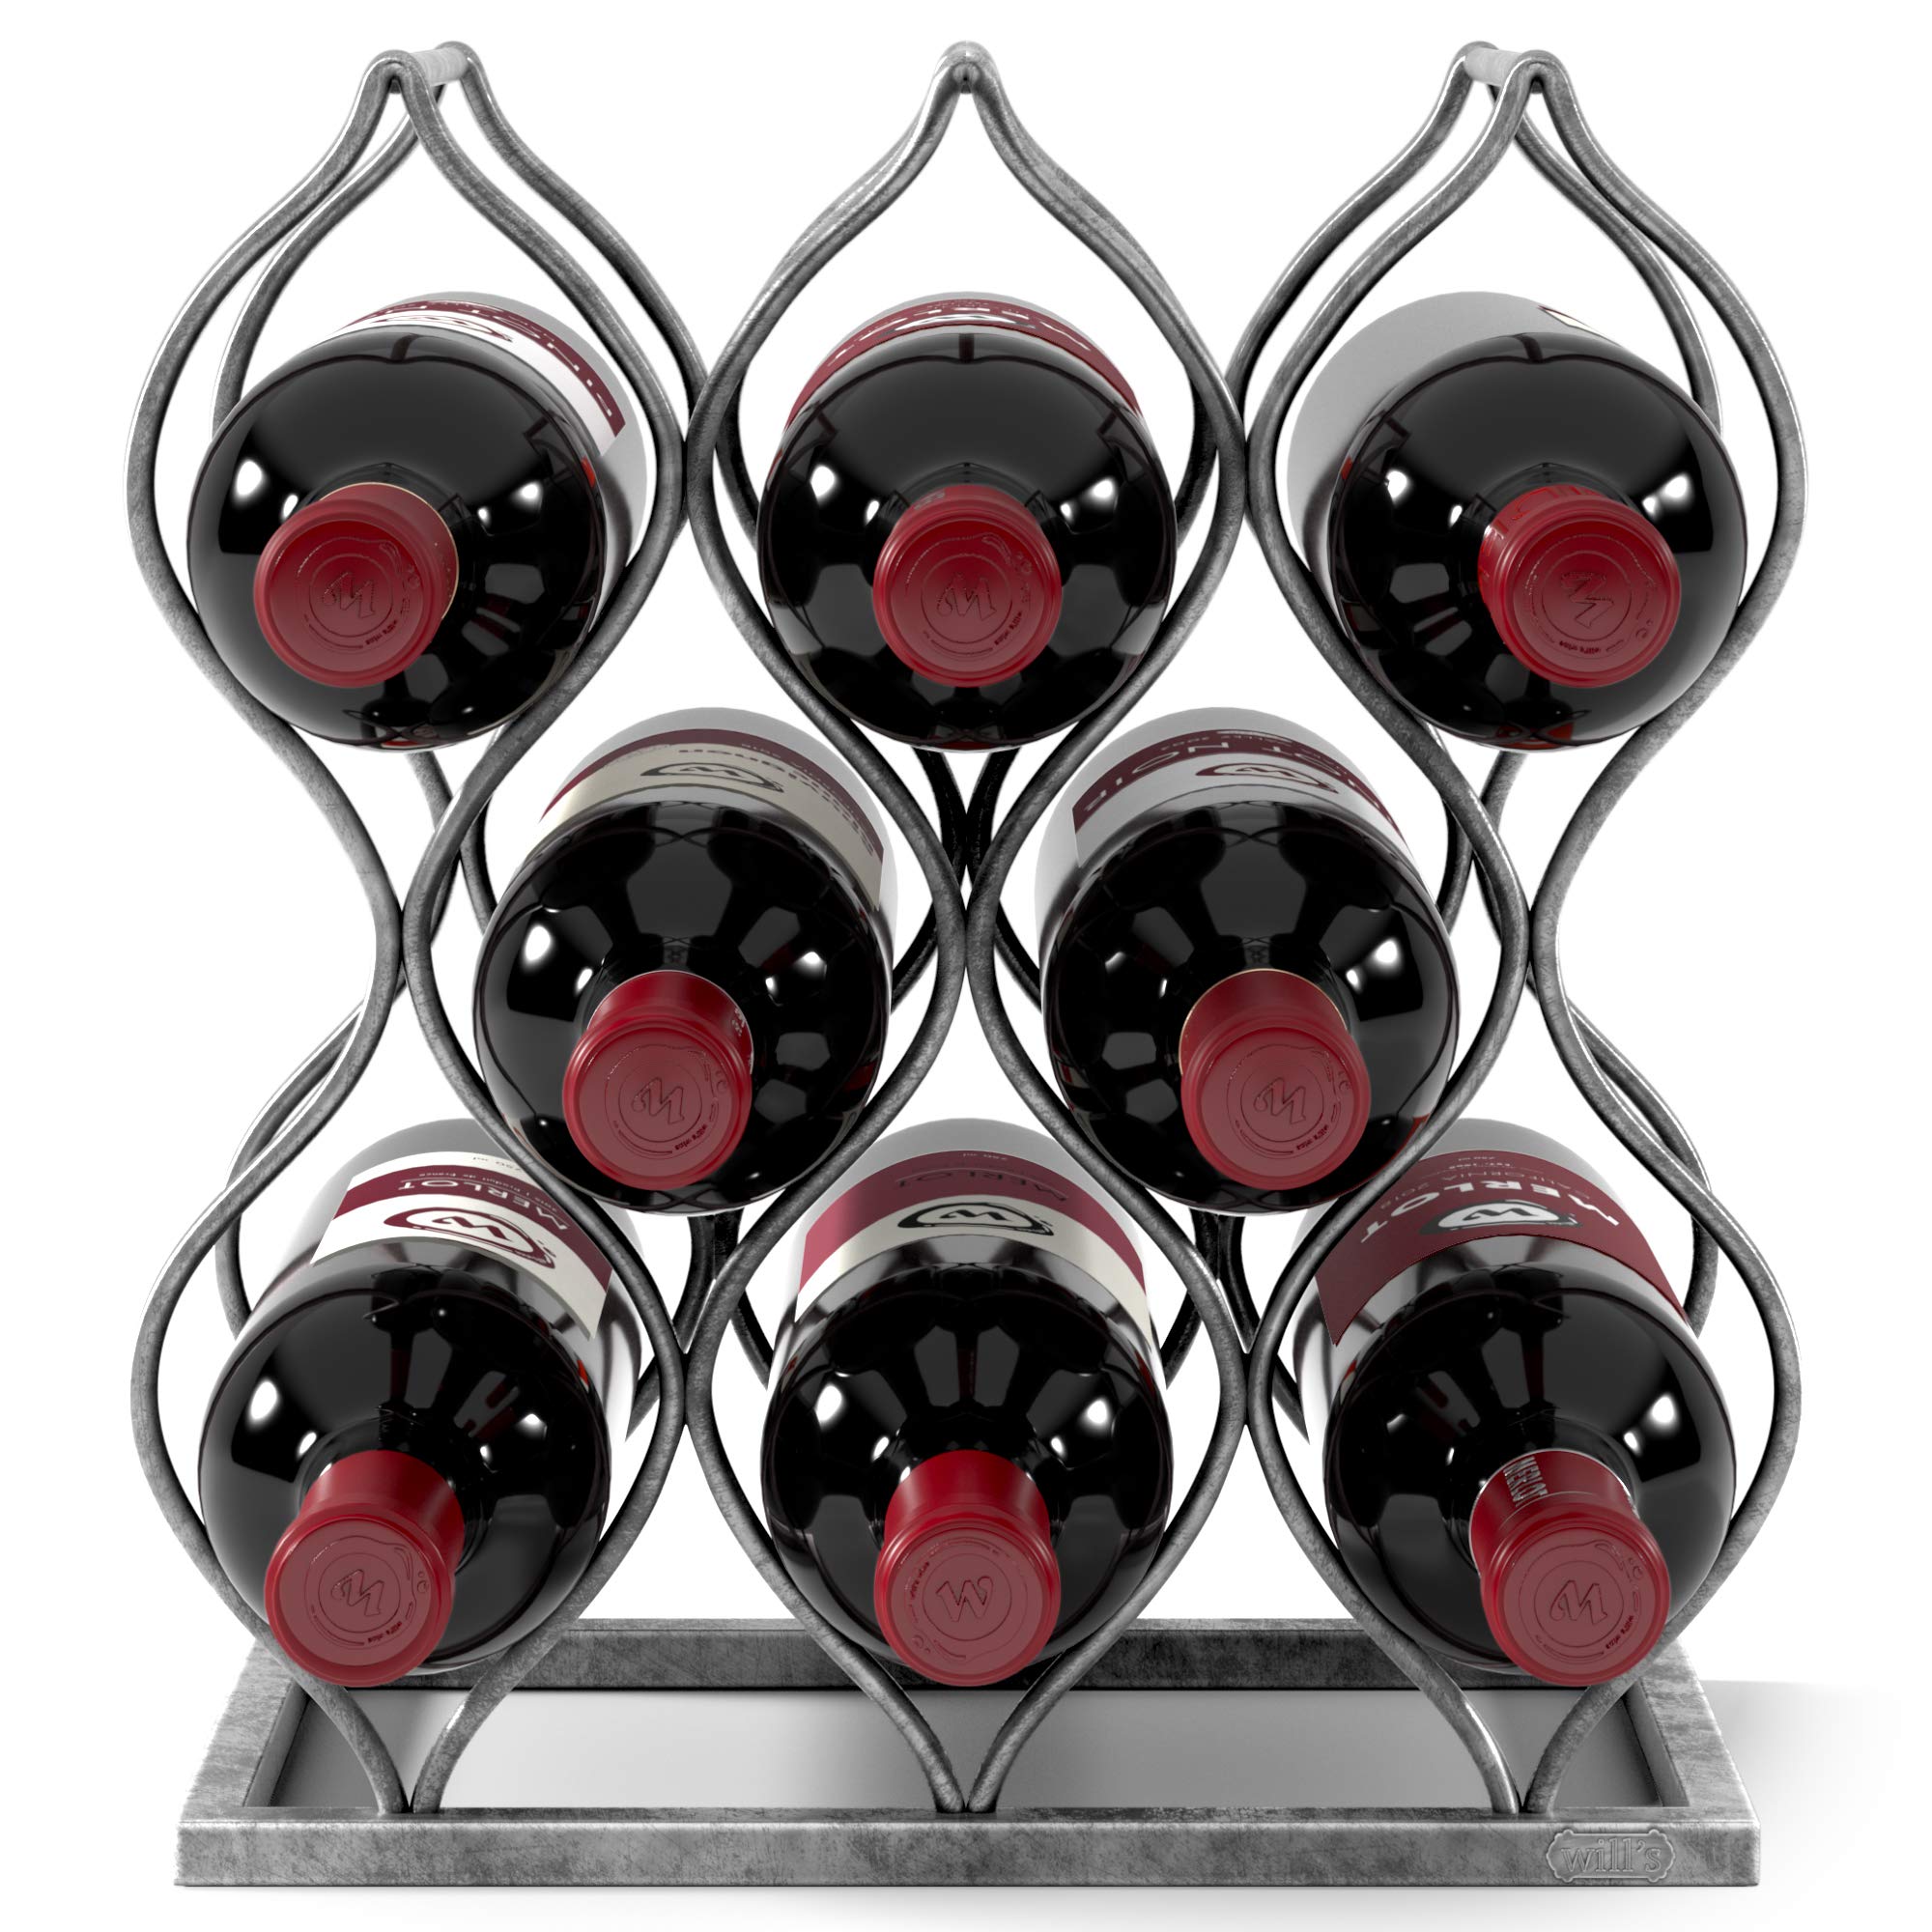 will's Tabletop Wine Rack - Imperial Trellis (8 Bottle, Silver) – Freestanding countertop Wine Rack and Wine Bottle Storage, Perfect Wine Gifts and Accessories for Wine Lovers, no Assembly Required